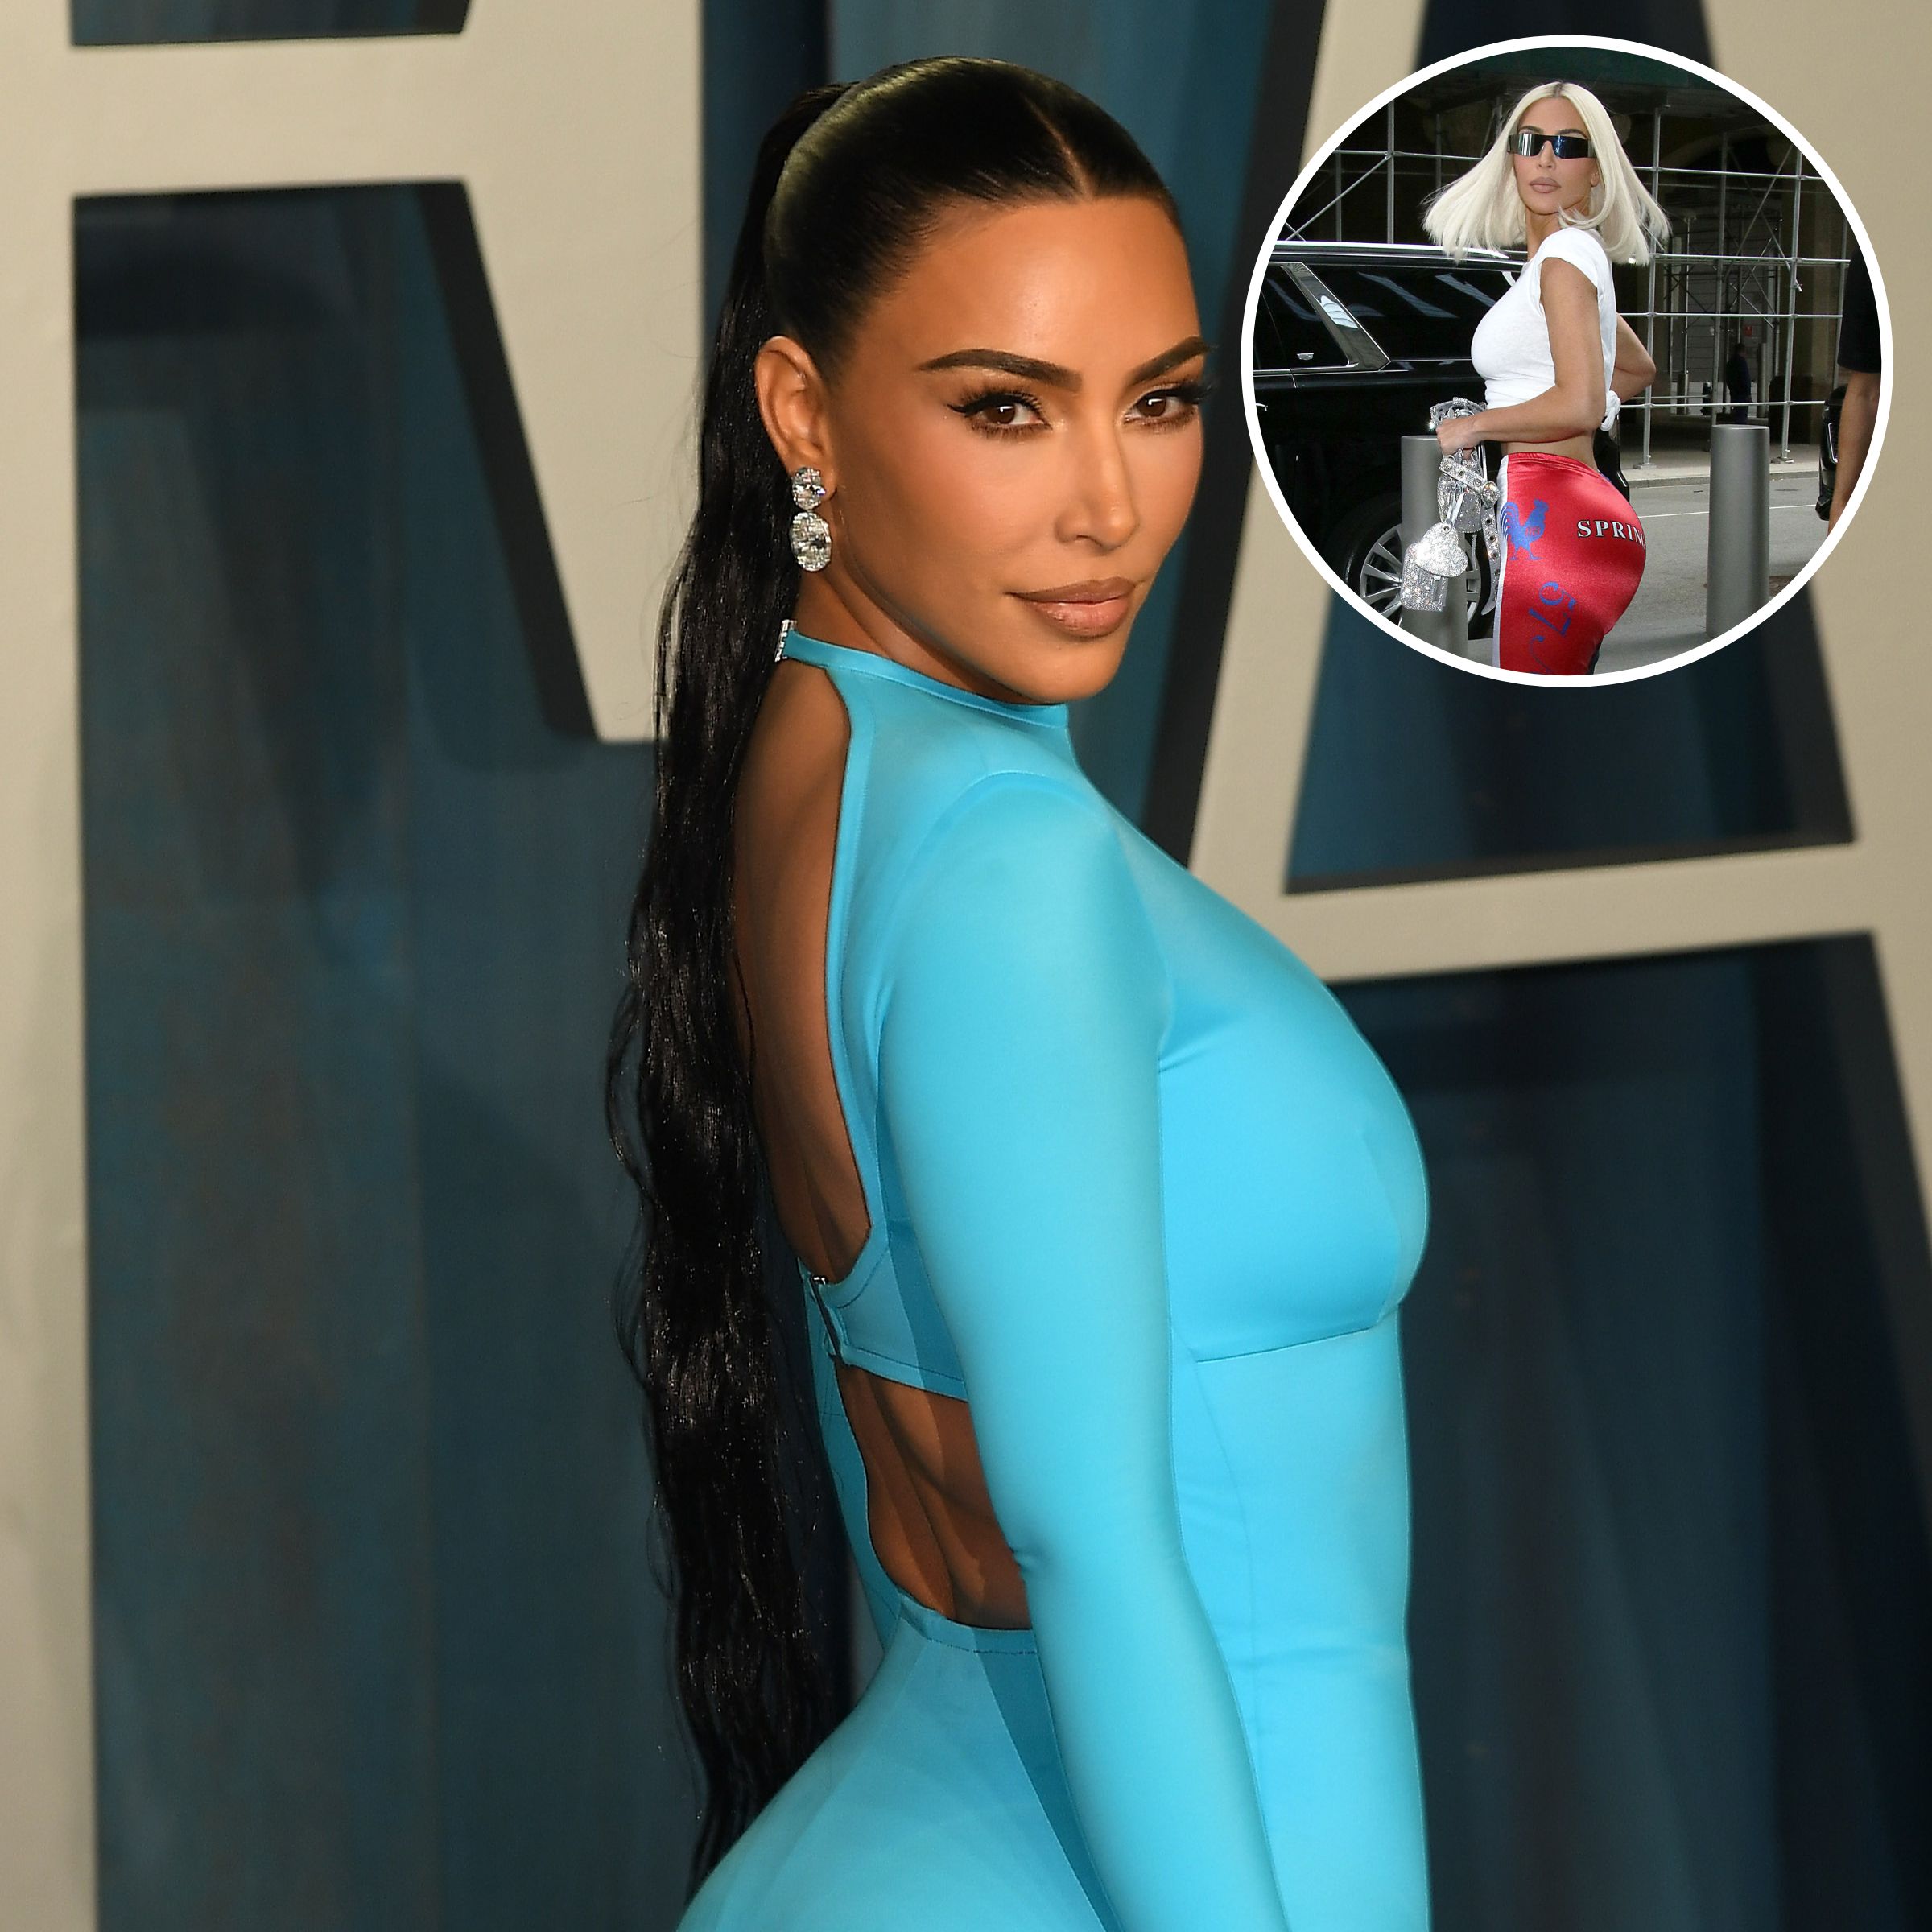 Kim Presented - Is Kim Kardashian's Butt Real? See Before and After Booty Pics